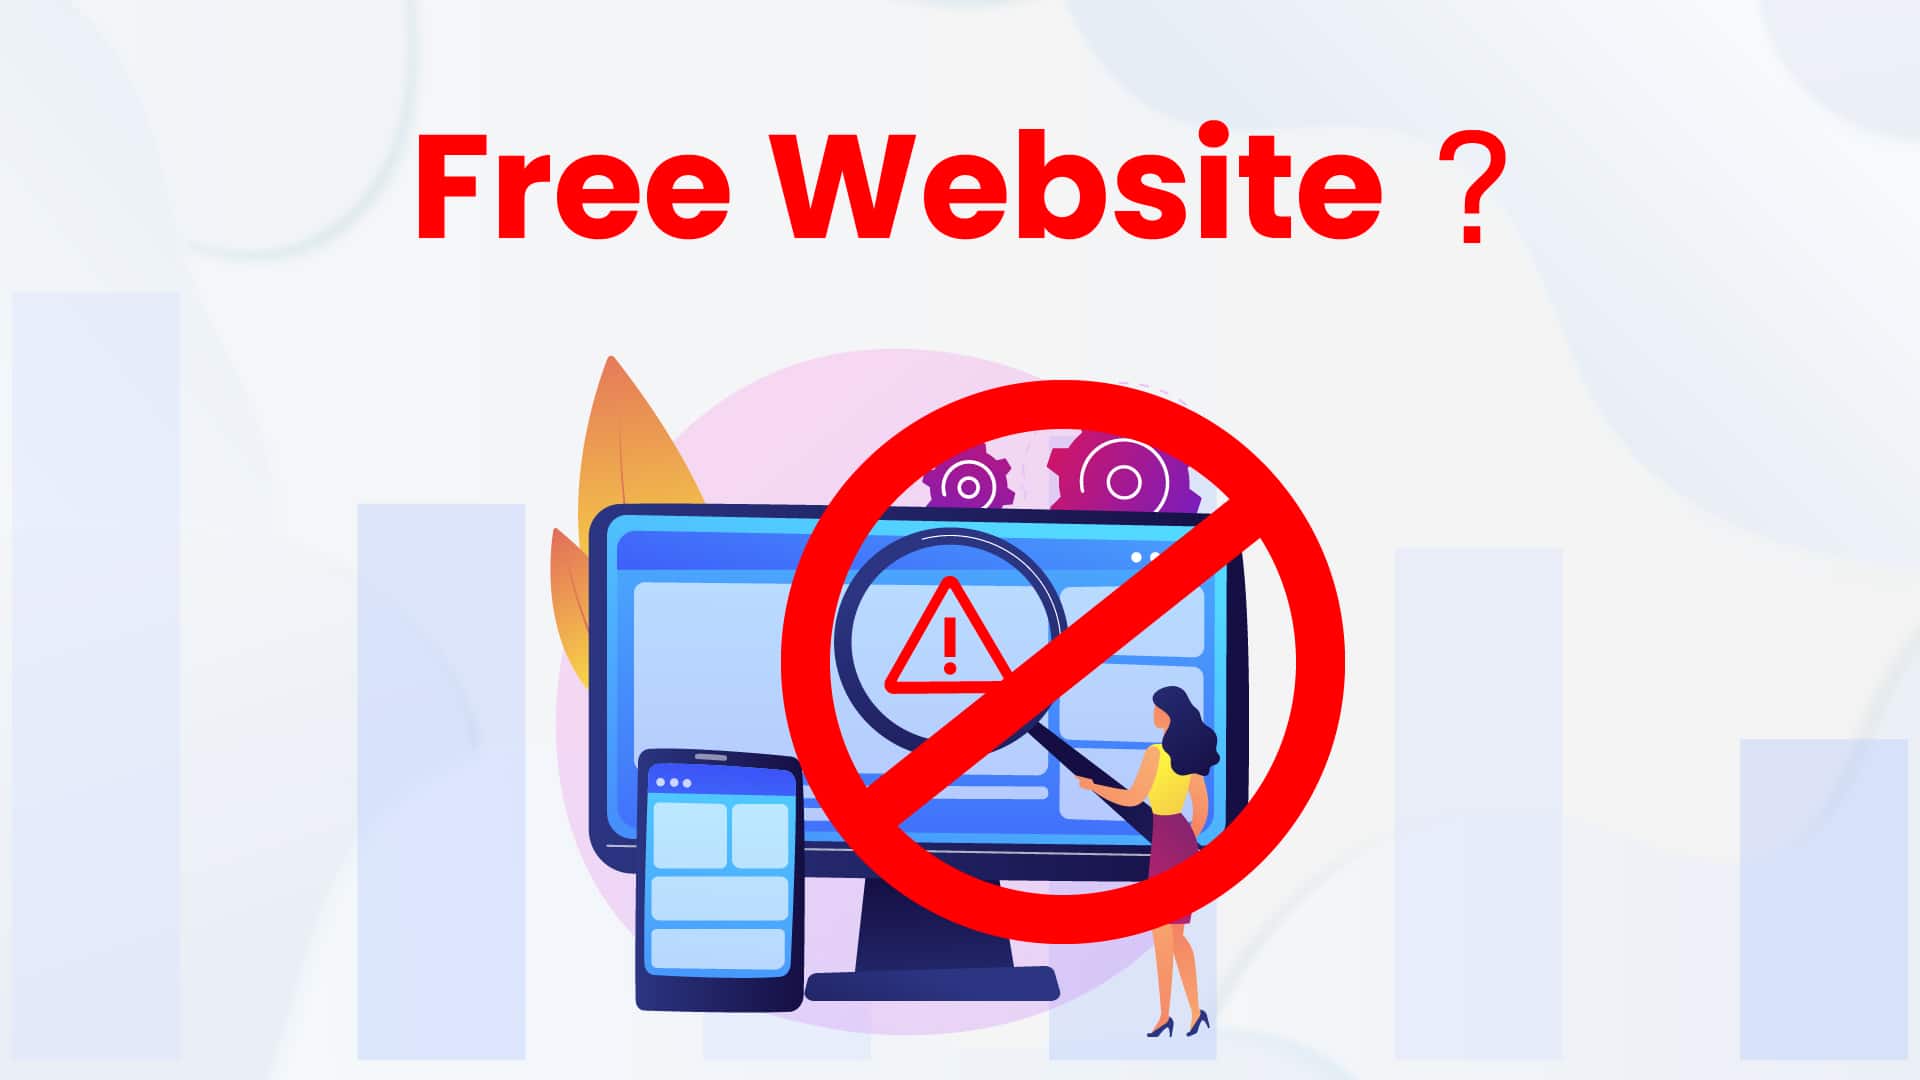 Why You Should Not Consider a Free Website